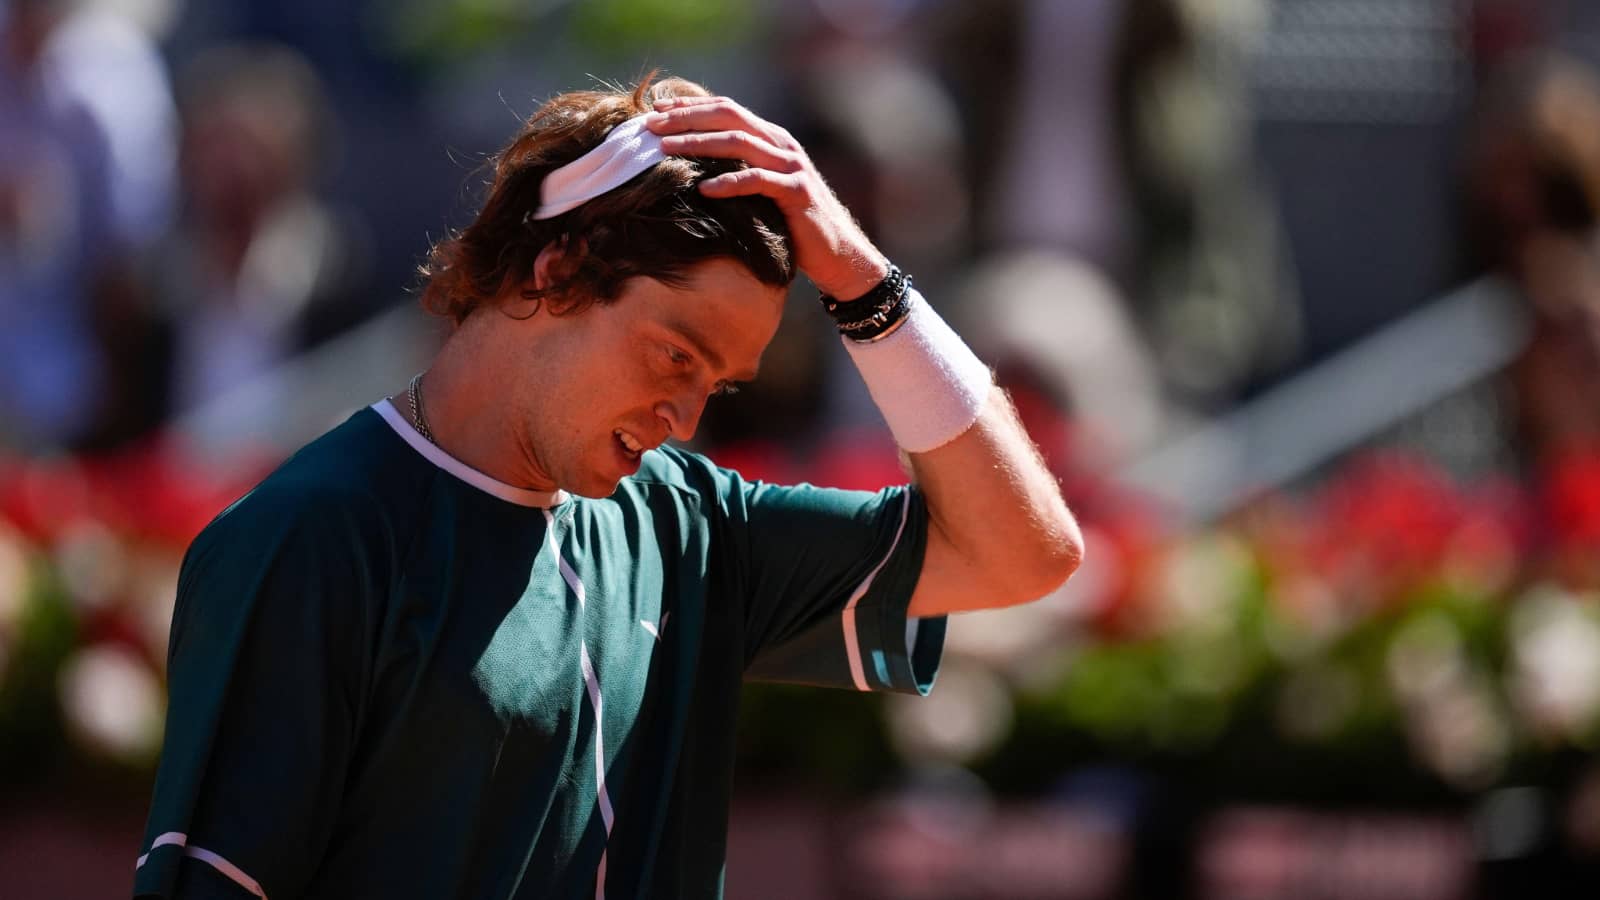 ‘i already had many warnings in my life’ – andrey rublev on recognising need to be ‘calmer’